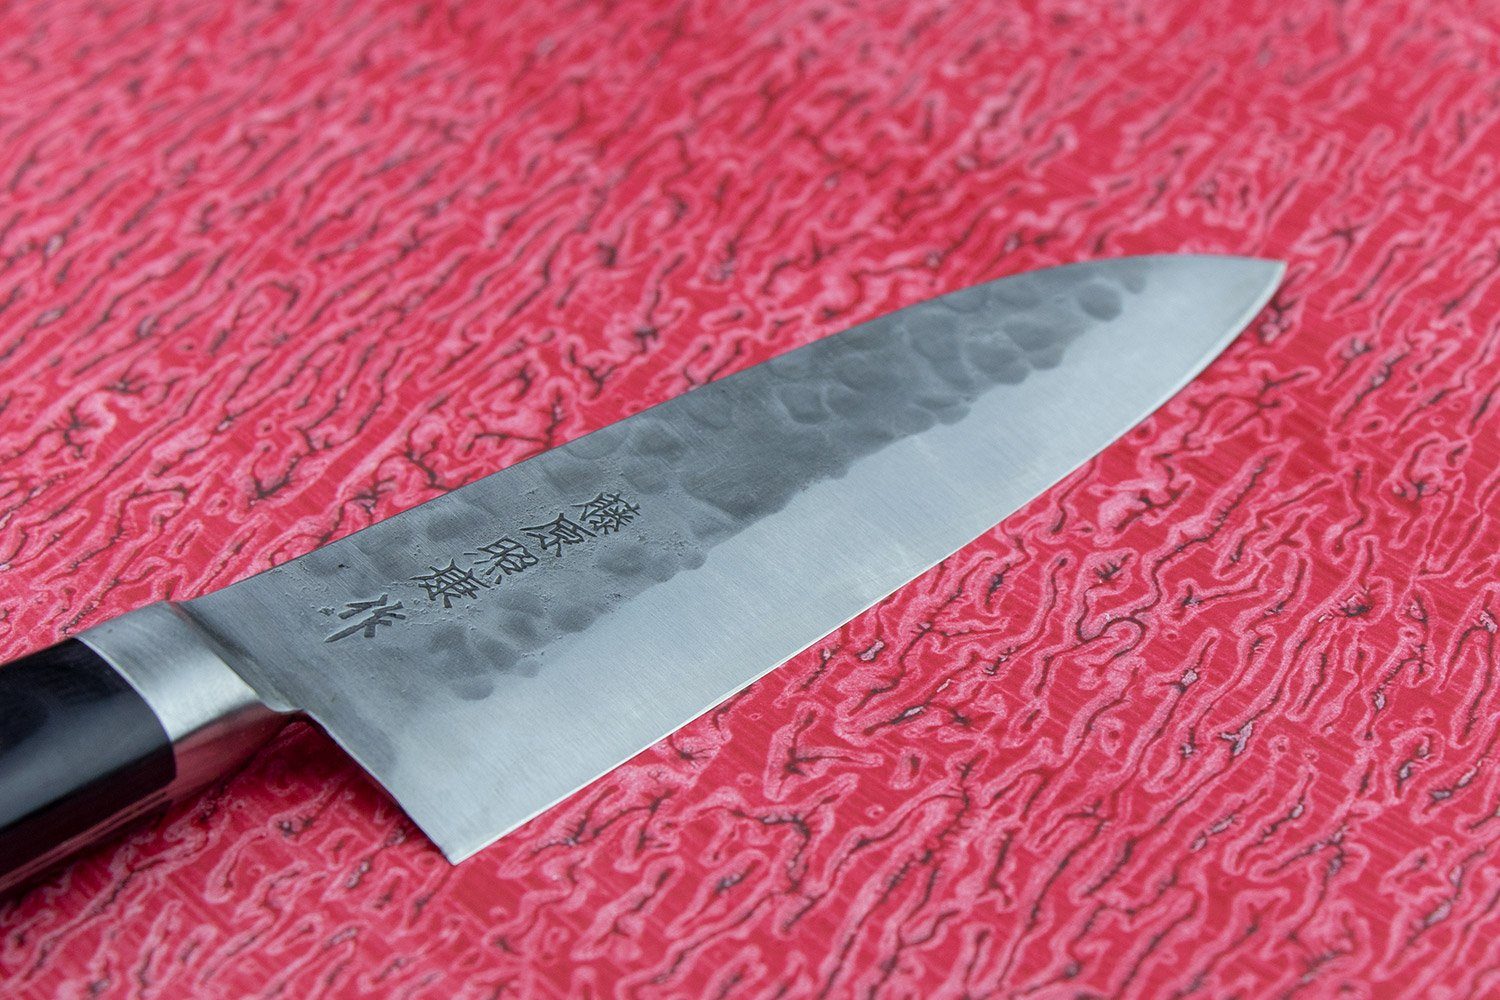 How to Use, Season, & Maintain Carbon Steel Pans  Knifewear - Handcrafted  Japanese Kitchen Knives